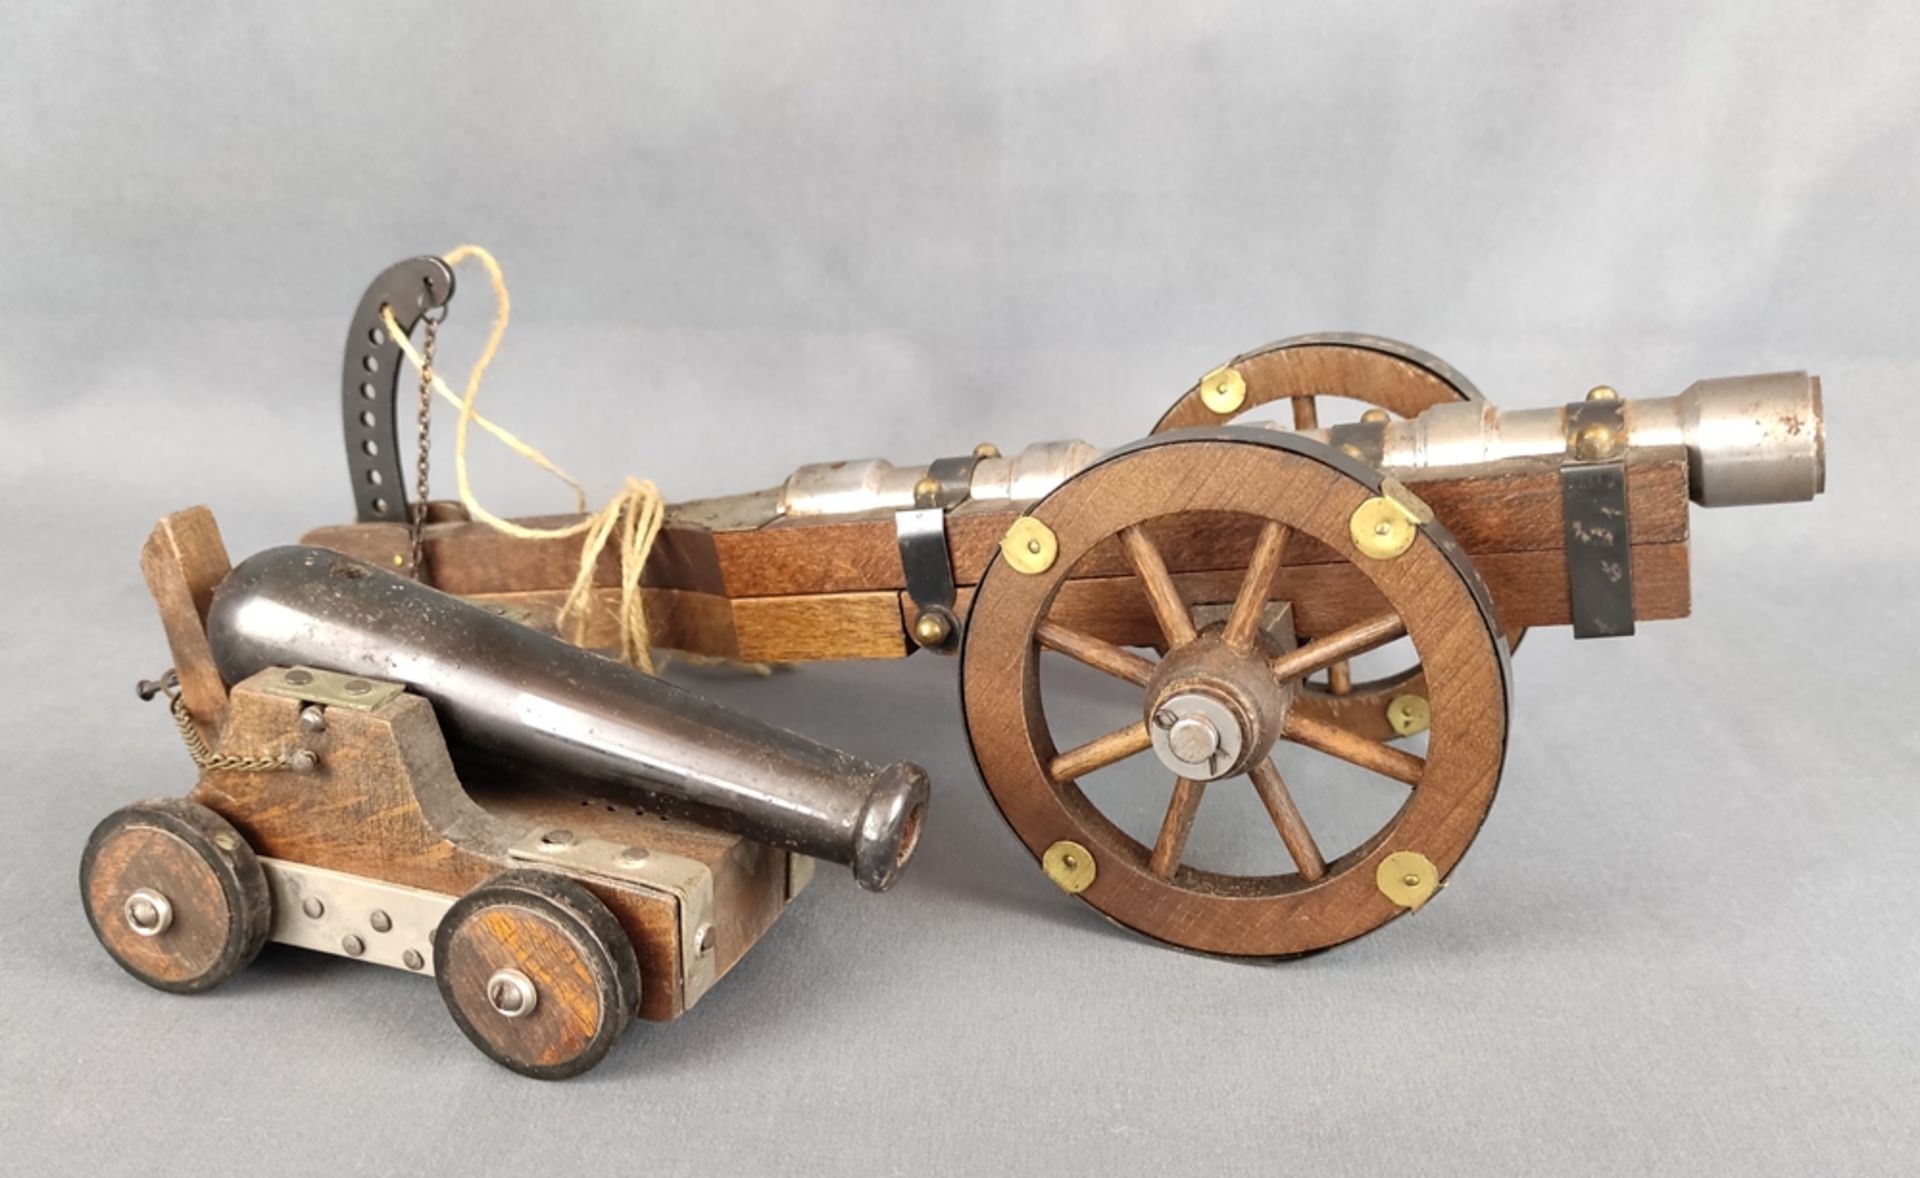 Two model cannons, iron cannon on wooden two-wheeled cart with brass fittings, cannon can be - Image 3 of 3